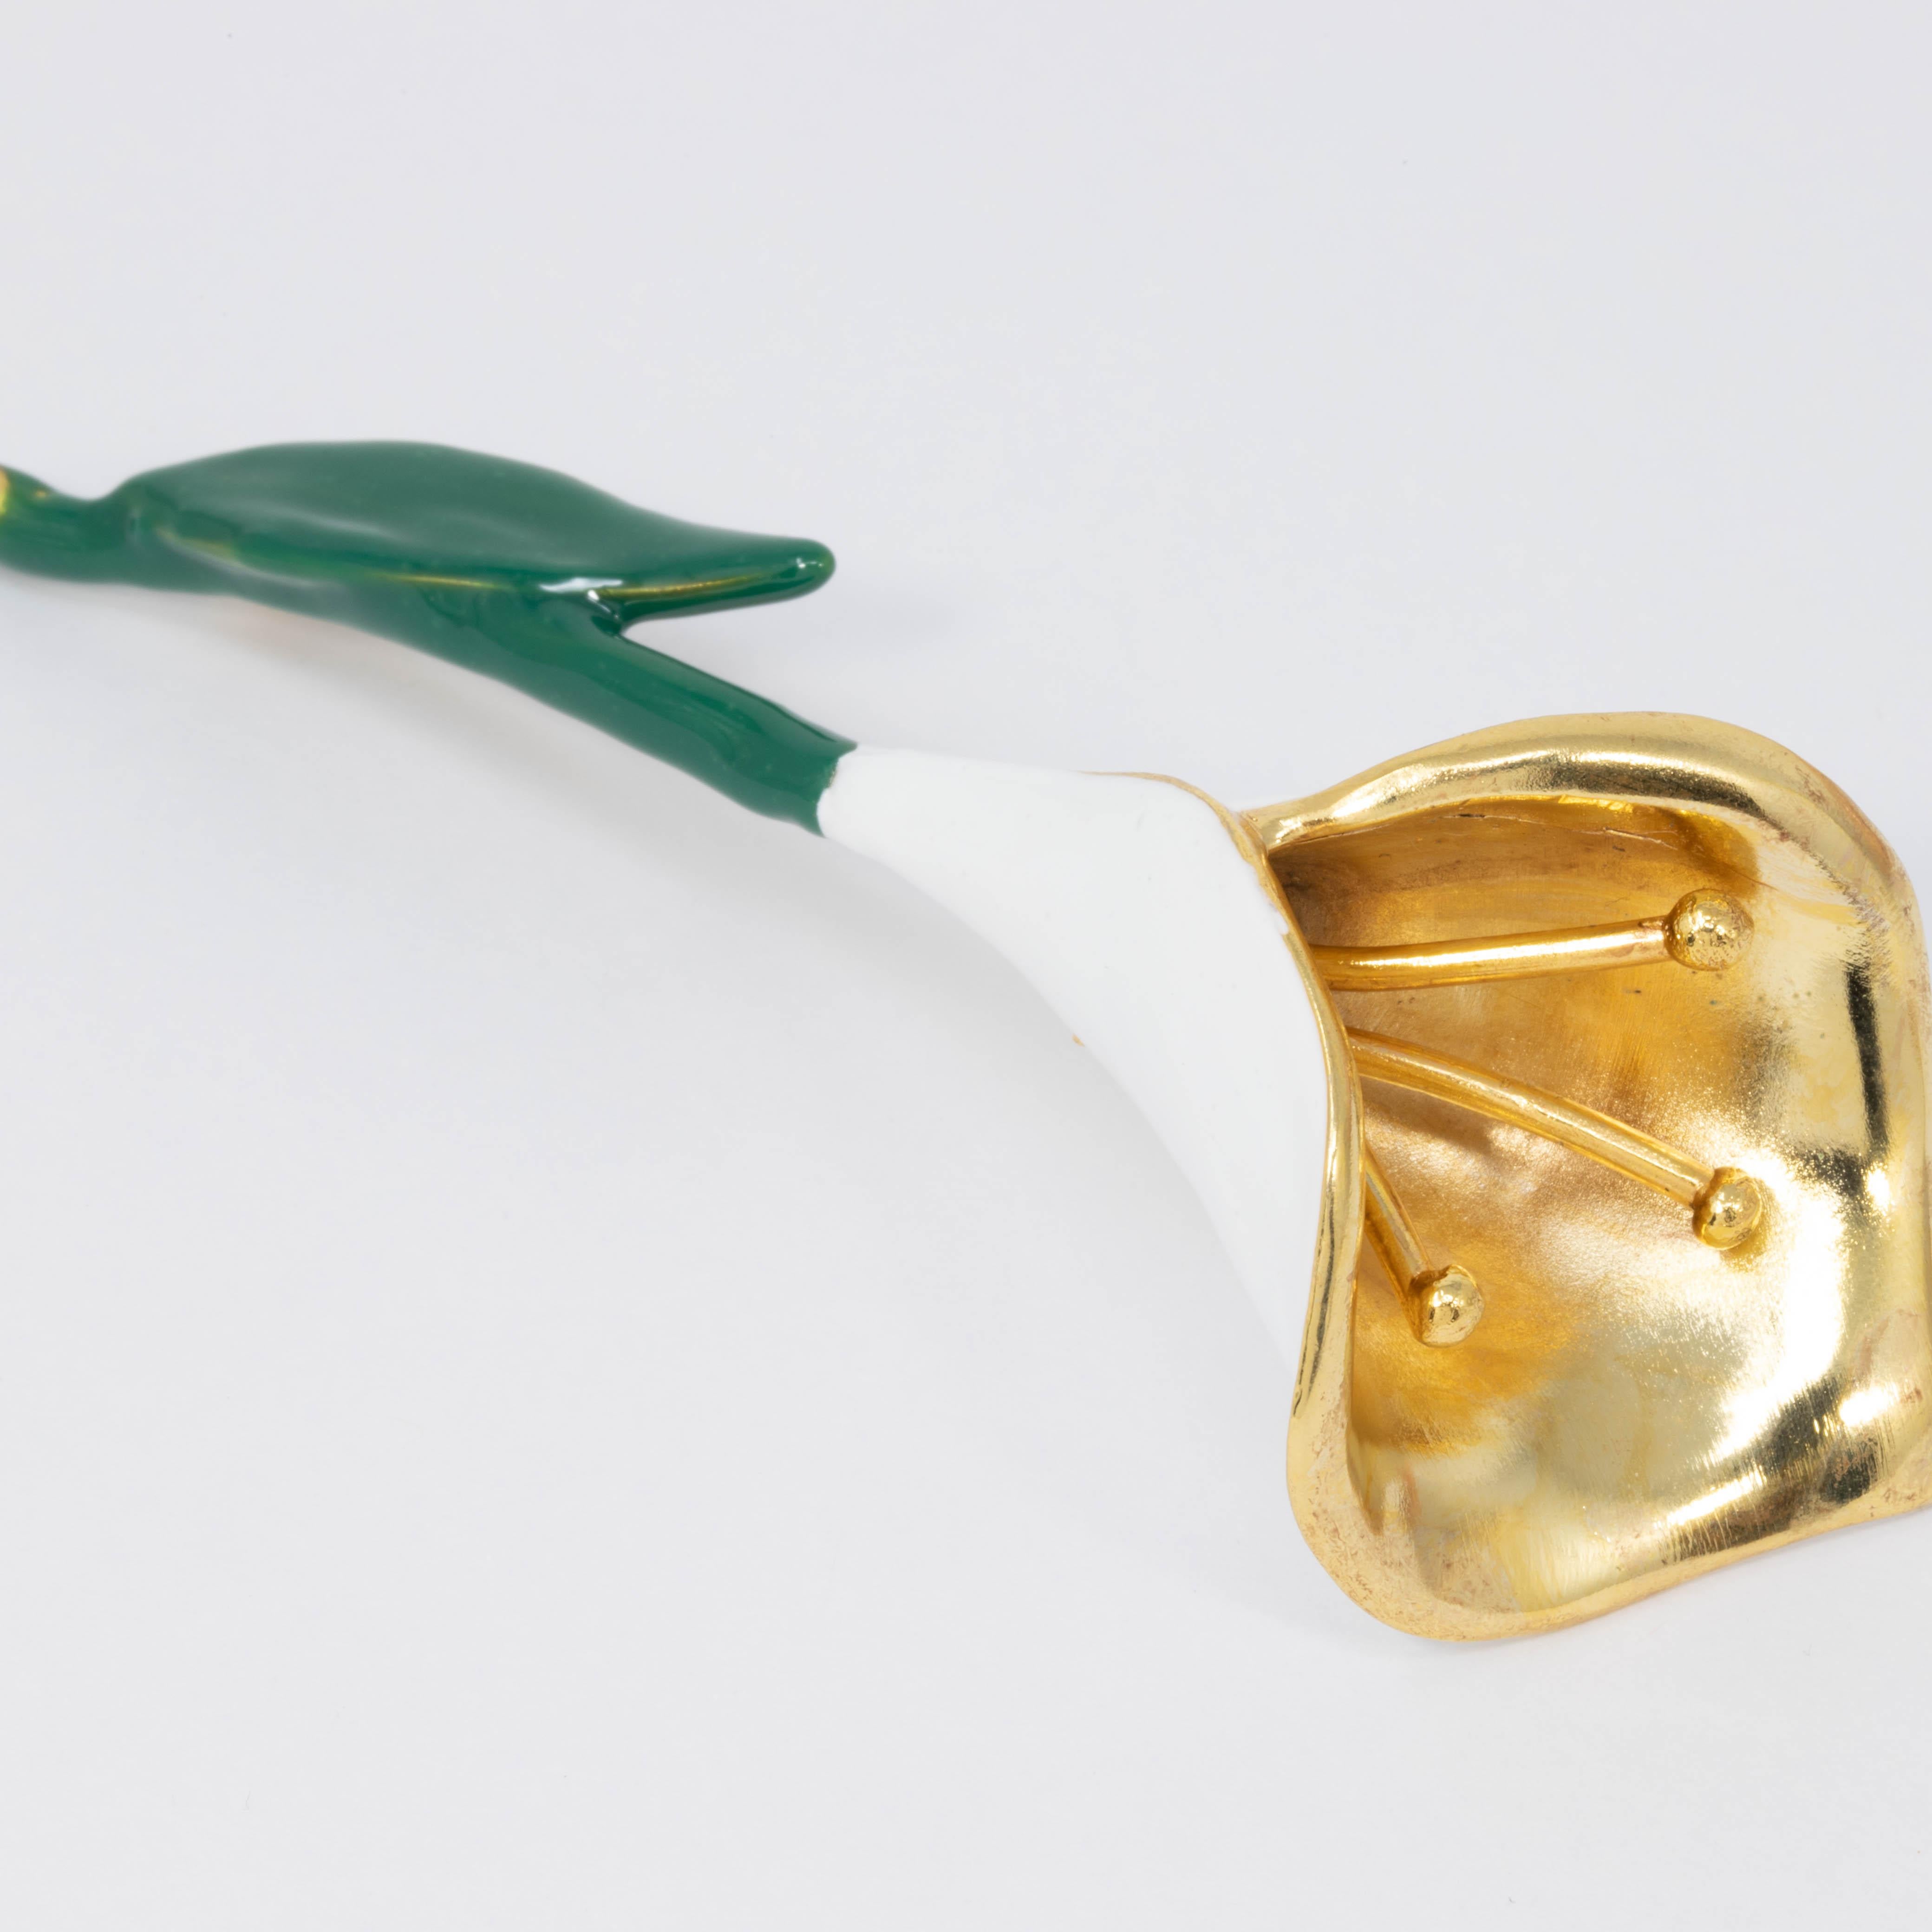 Flower chic pin brooch by Oscar de la Renta. A white and green enamel calla lily in gold.

Gold plated.

Tags, Marks, Hallmarks: Oscar de la Renta, Made in USA